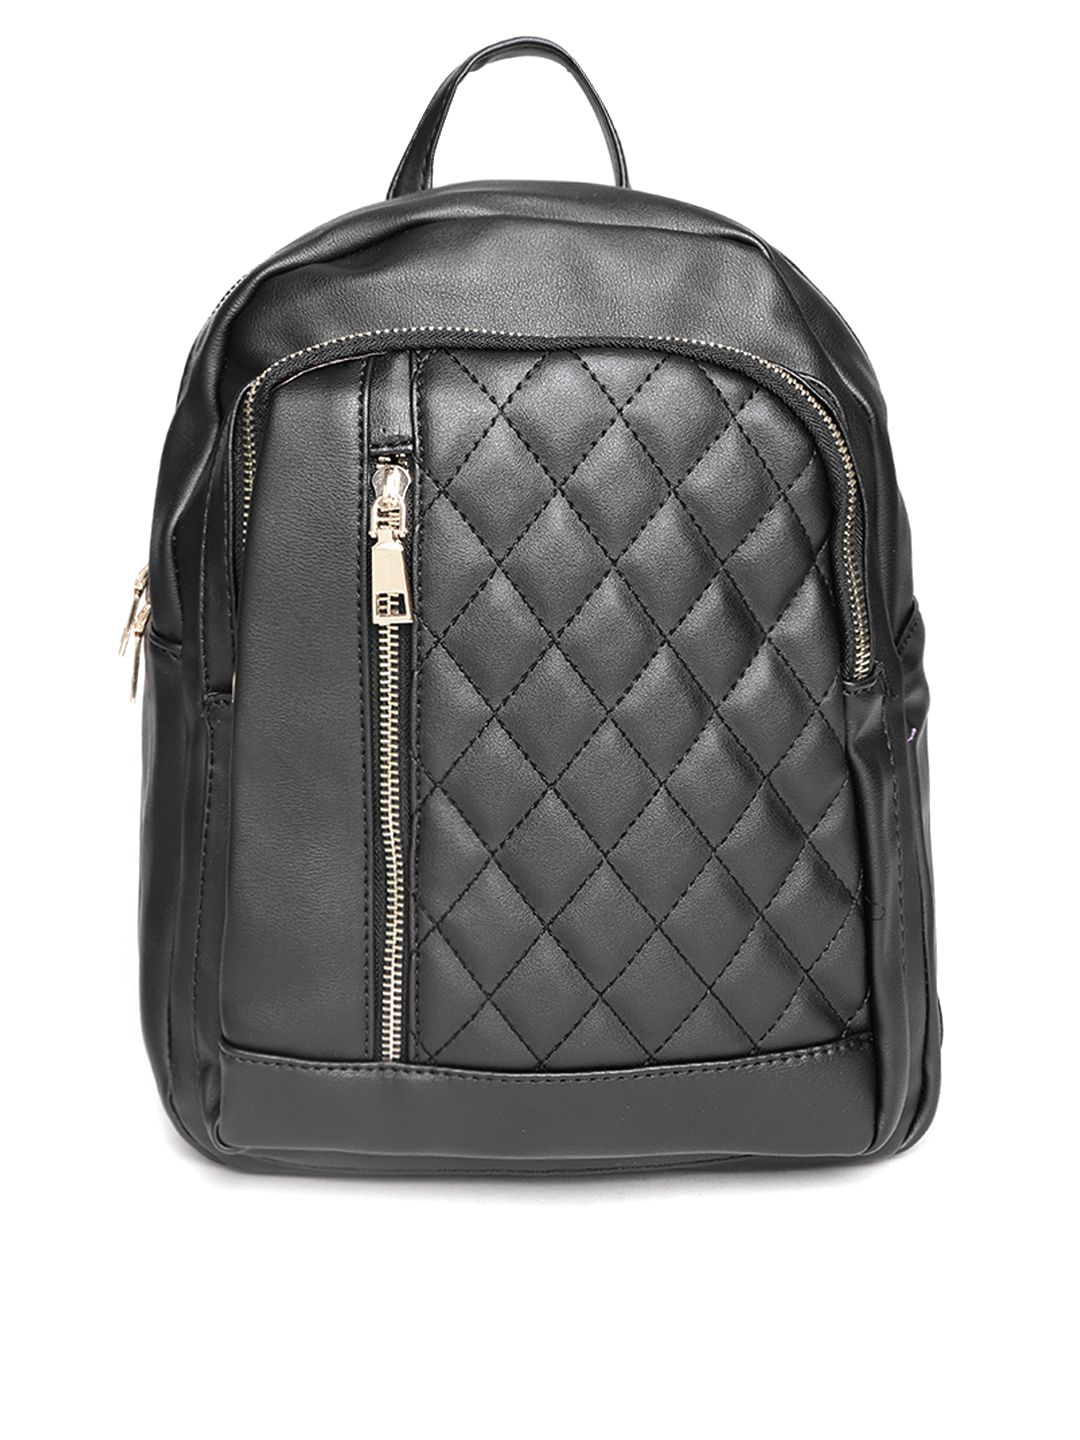 DressBerry Women Black Quilted Backpack Price in India